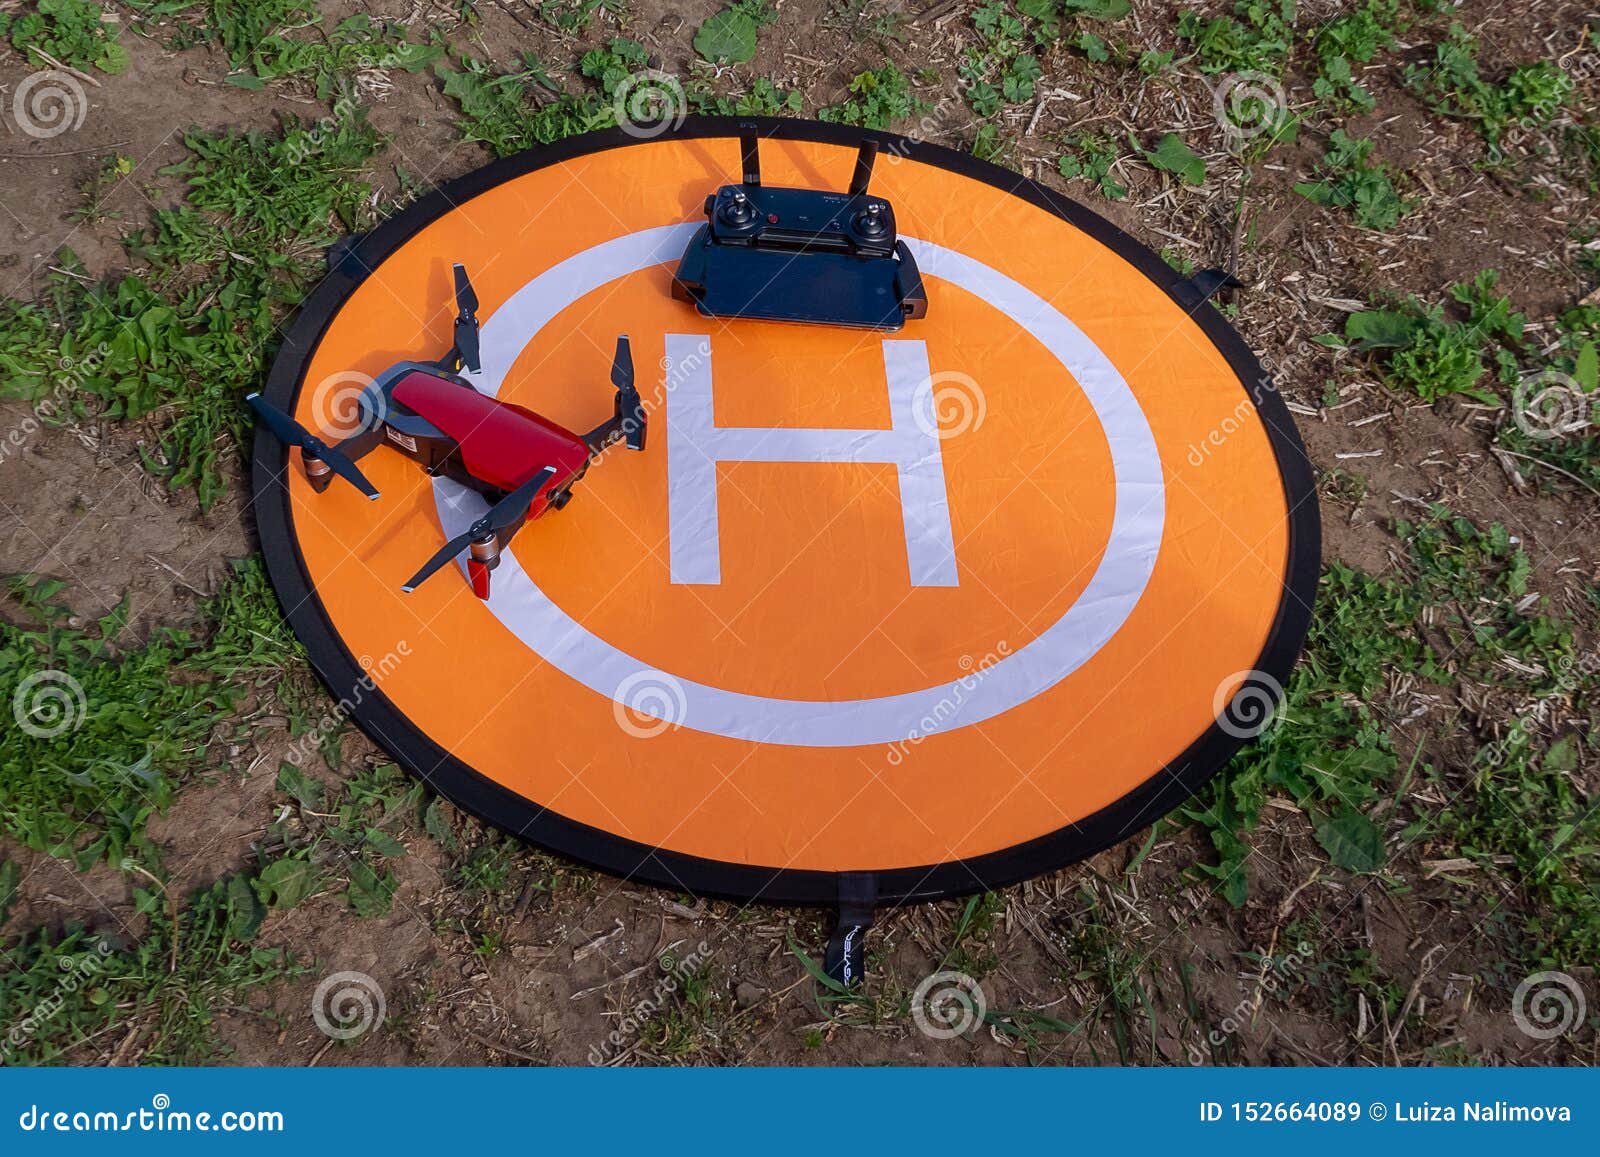 mestre analog dæmning Drone on the Heliport. Drone Phone and Control Panel on an Orange Helipad  on the Grass Editorial Stock Image - Image of camera, radio: 152664089